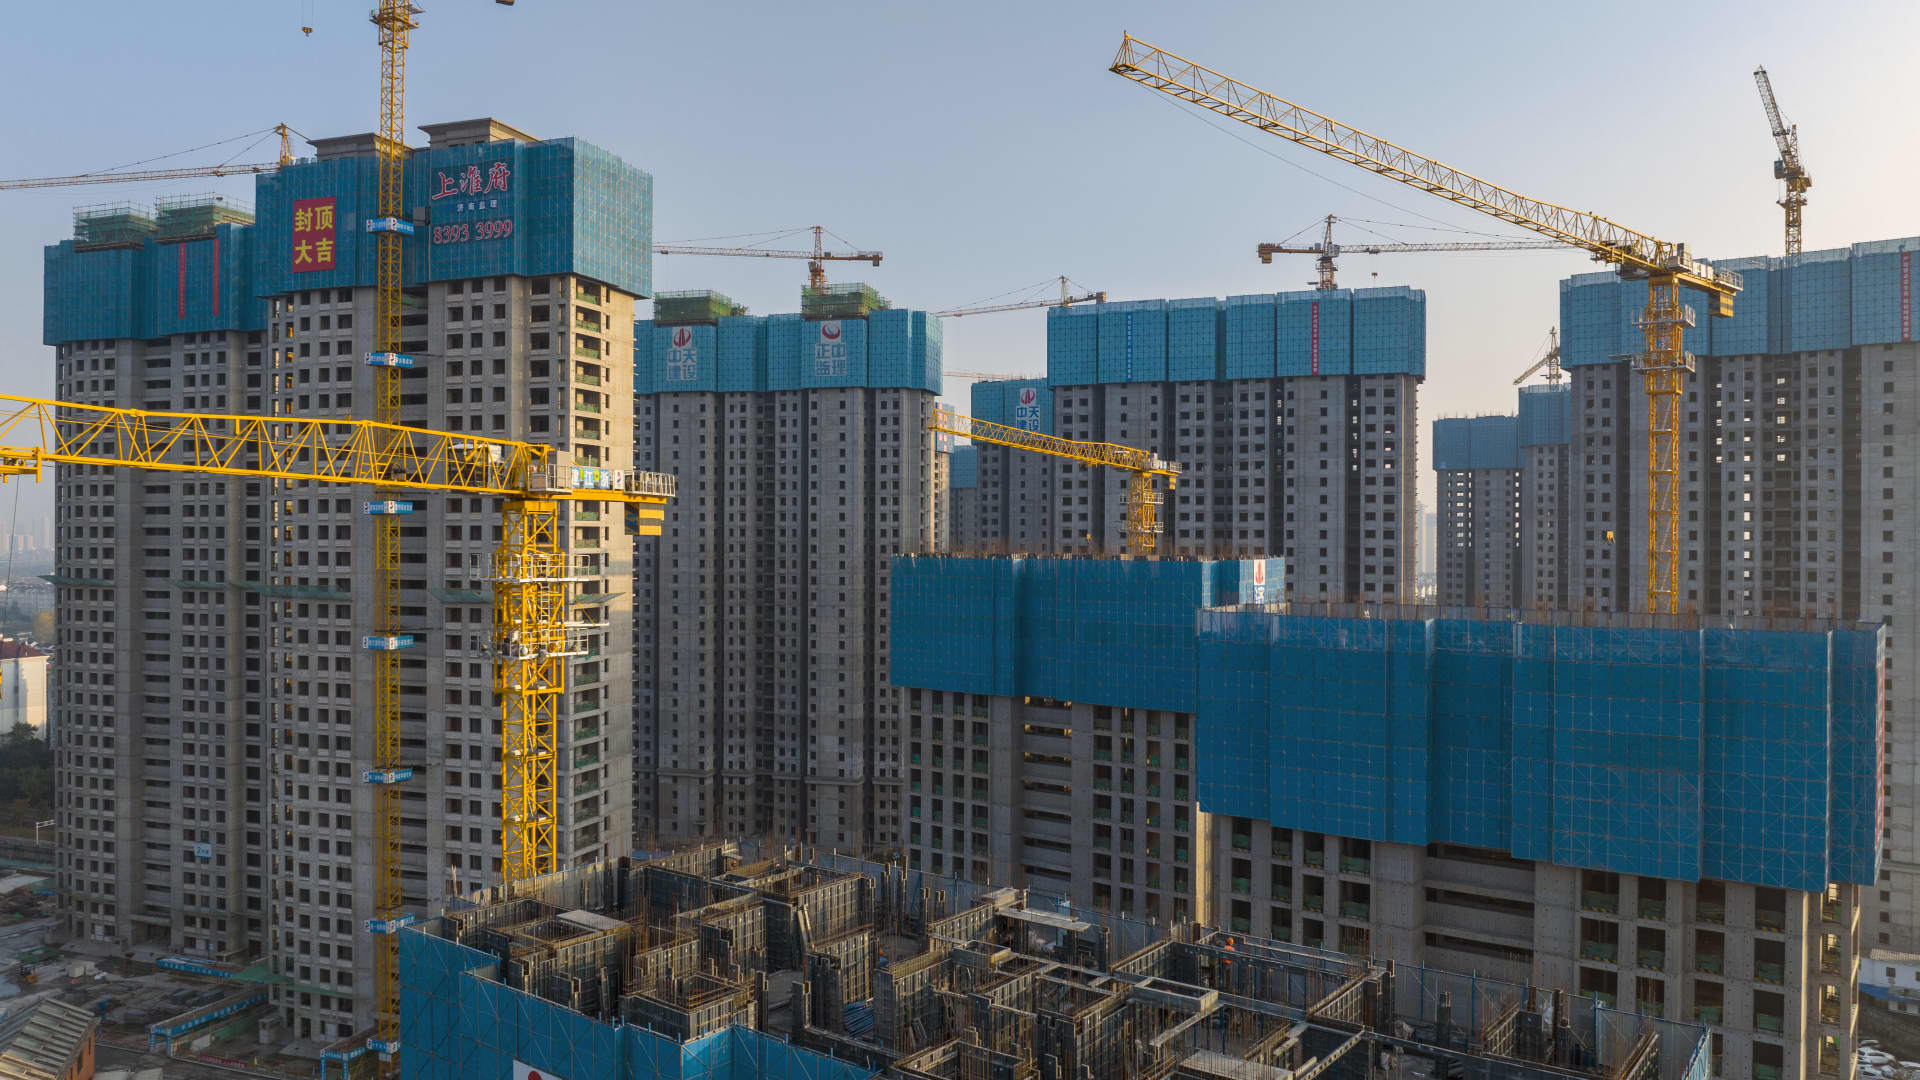 Chinese real estate stocks surged this month. But analyst warns of  'weak reality' vs. high expectations